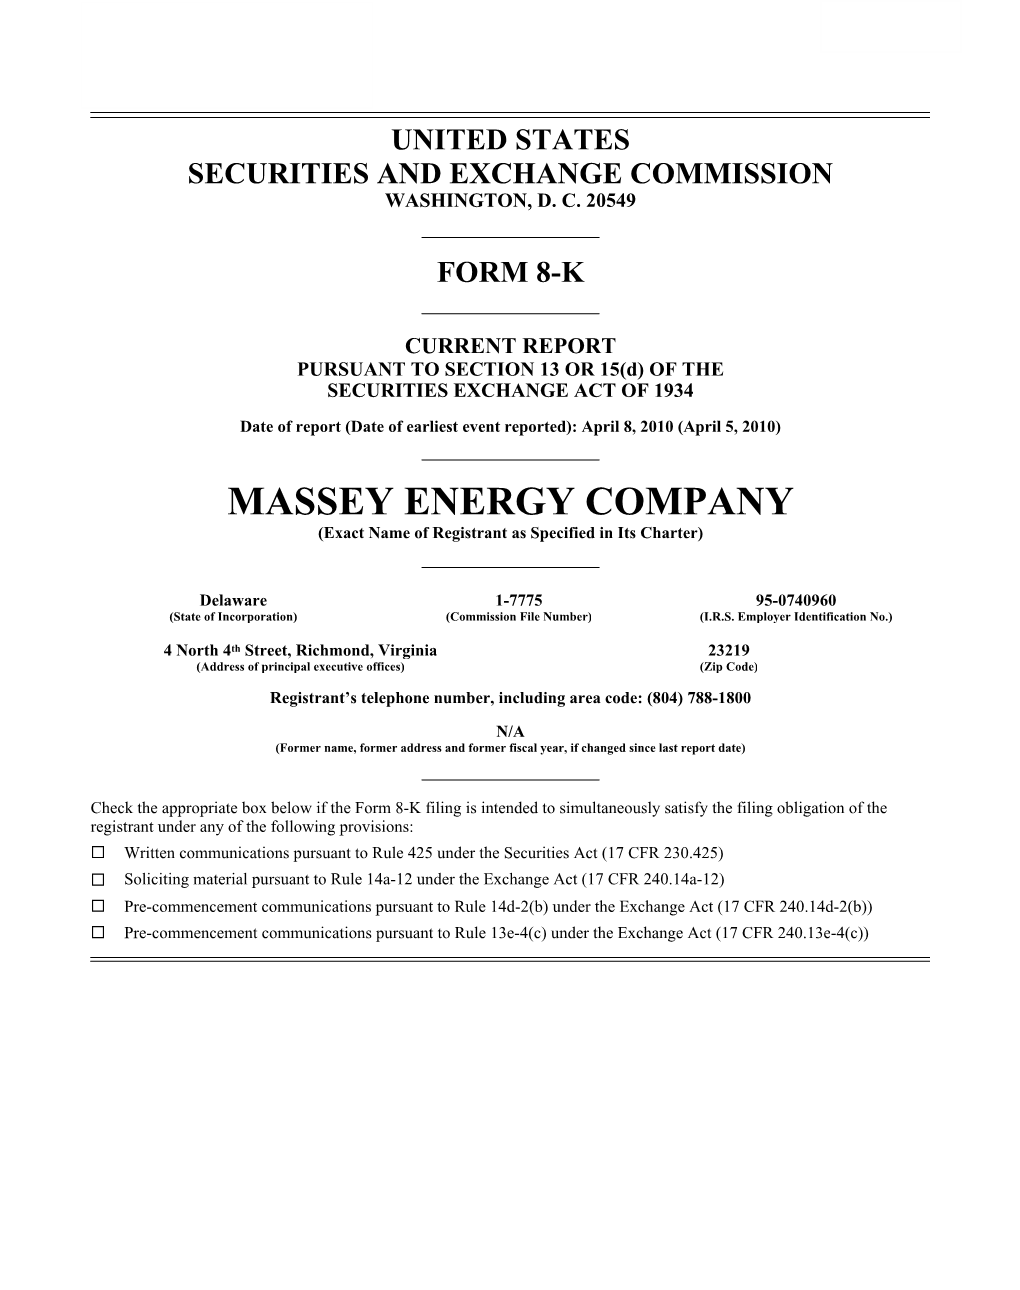 MASSEY ENERGY COMPANY (Exact Name of Registrant As Specified in Its Charter)